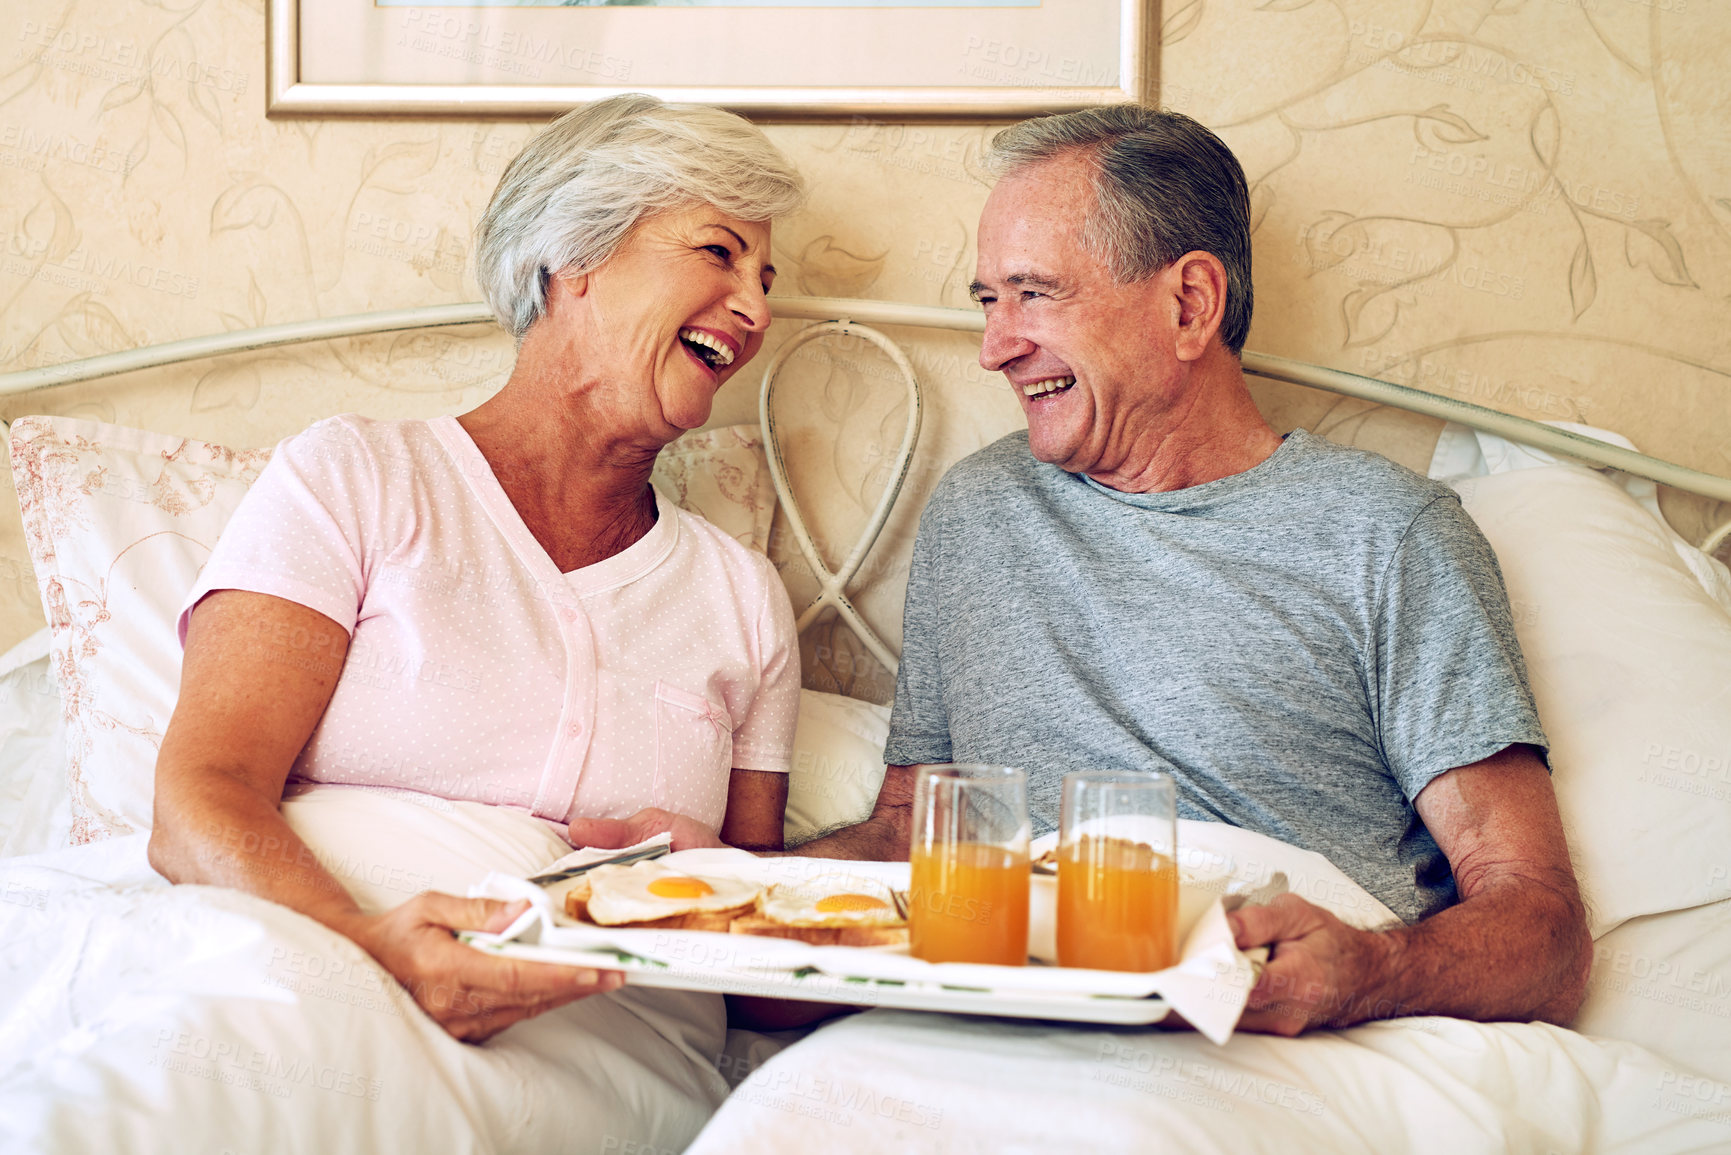 Buy stock photo Cropped shot of a senior couple having breakfast in bed together